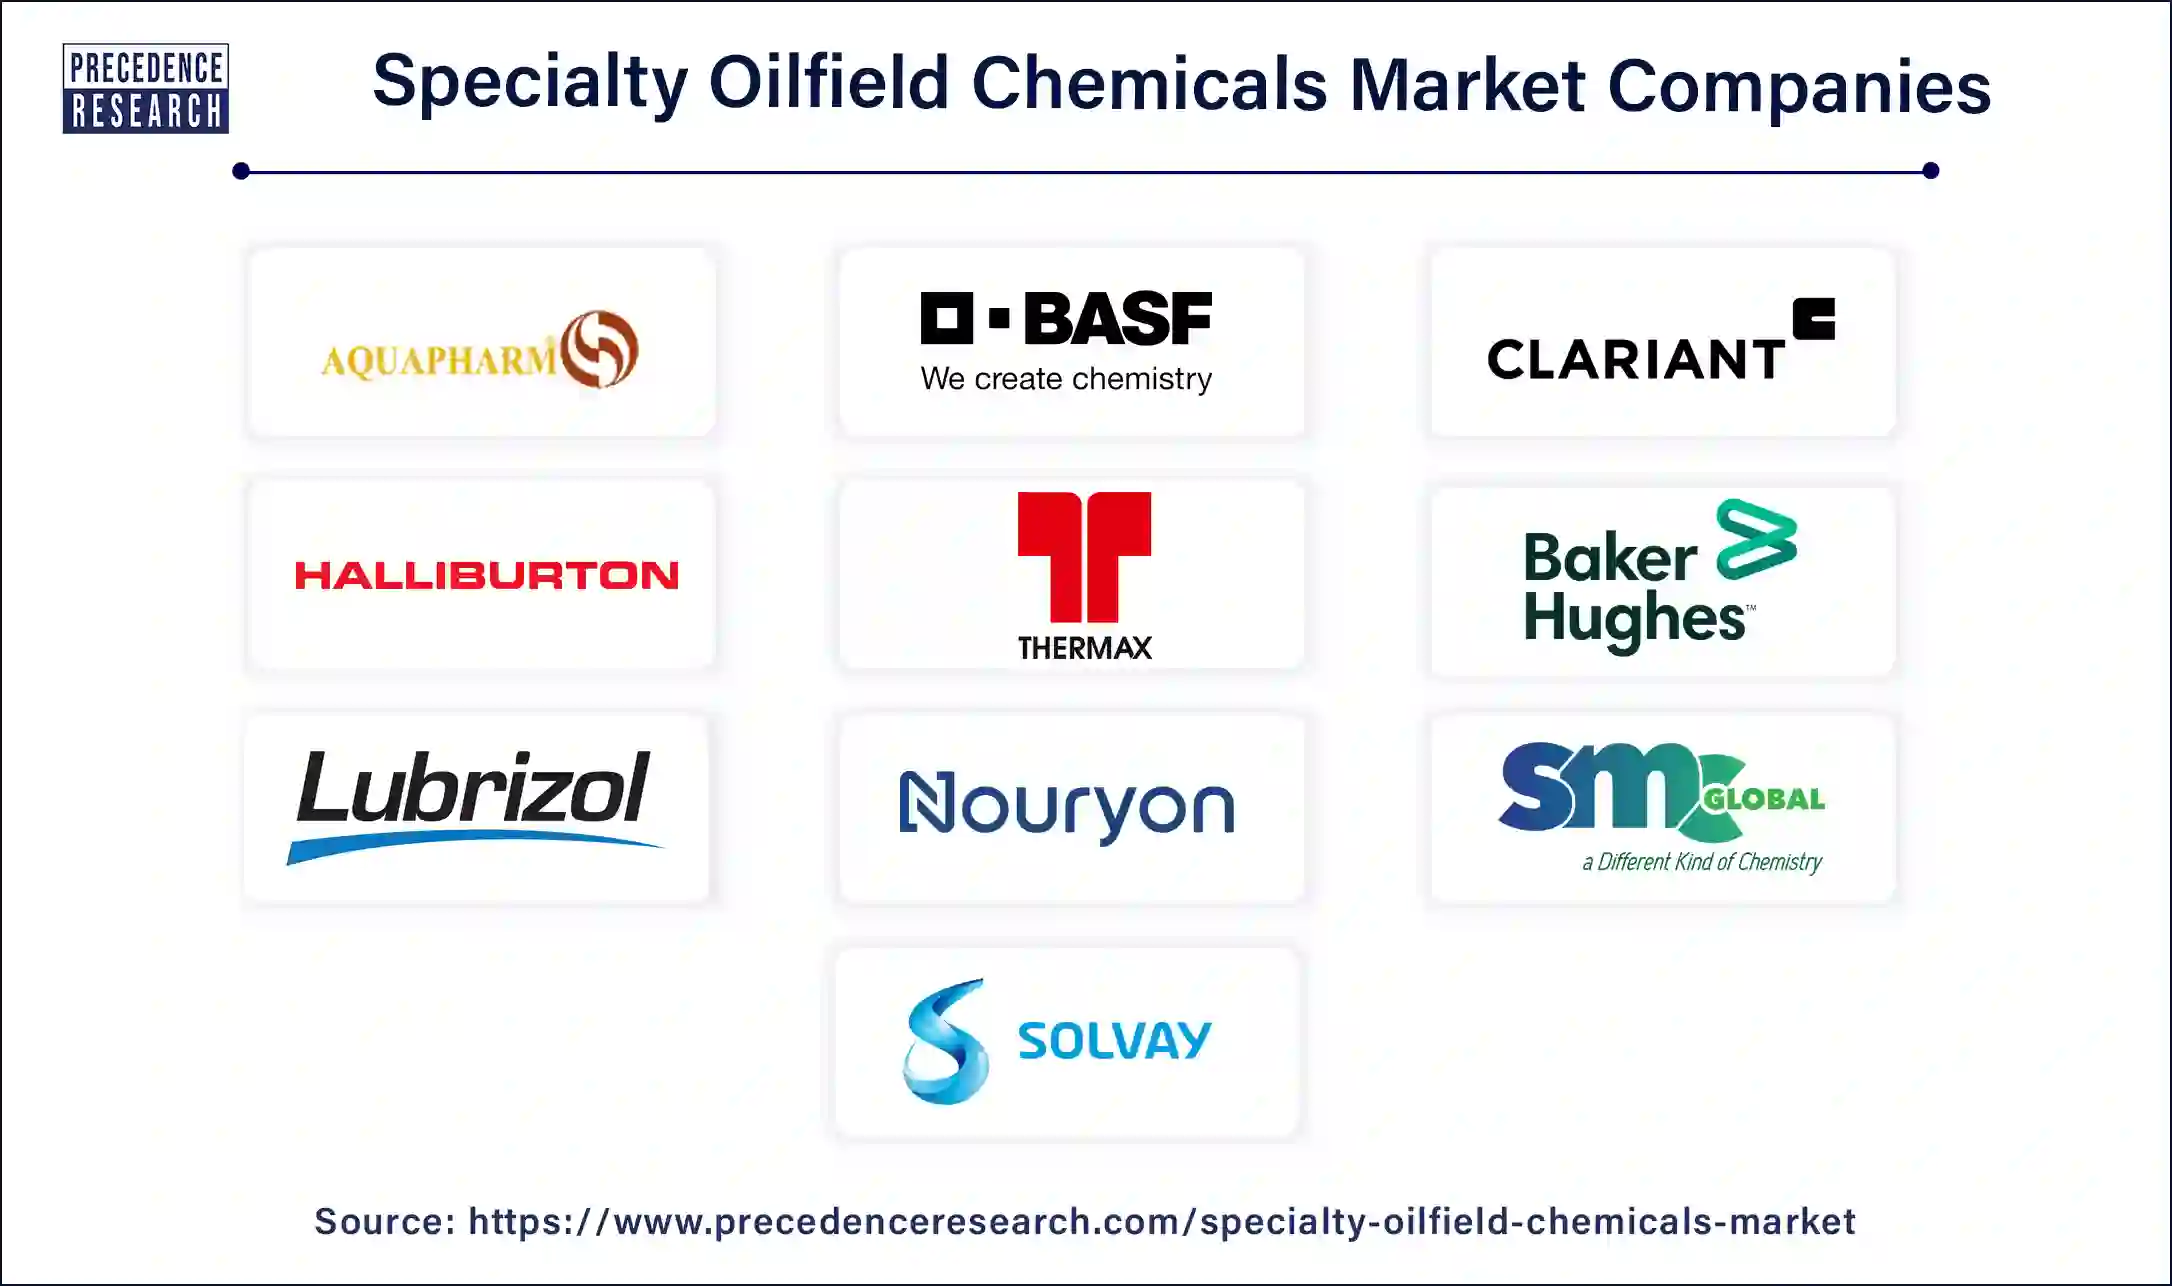 Specialty Oilfield Chemicals Companies